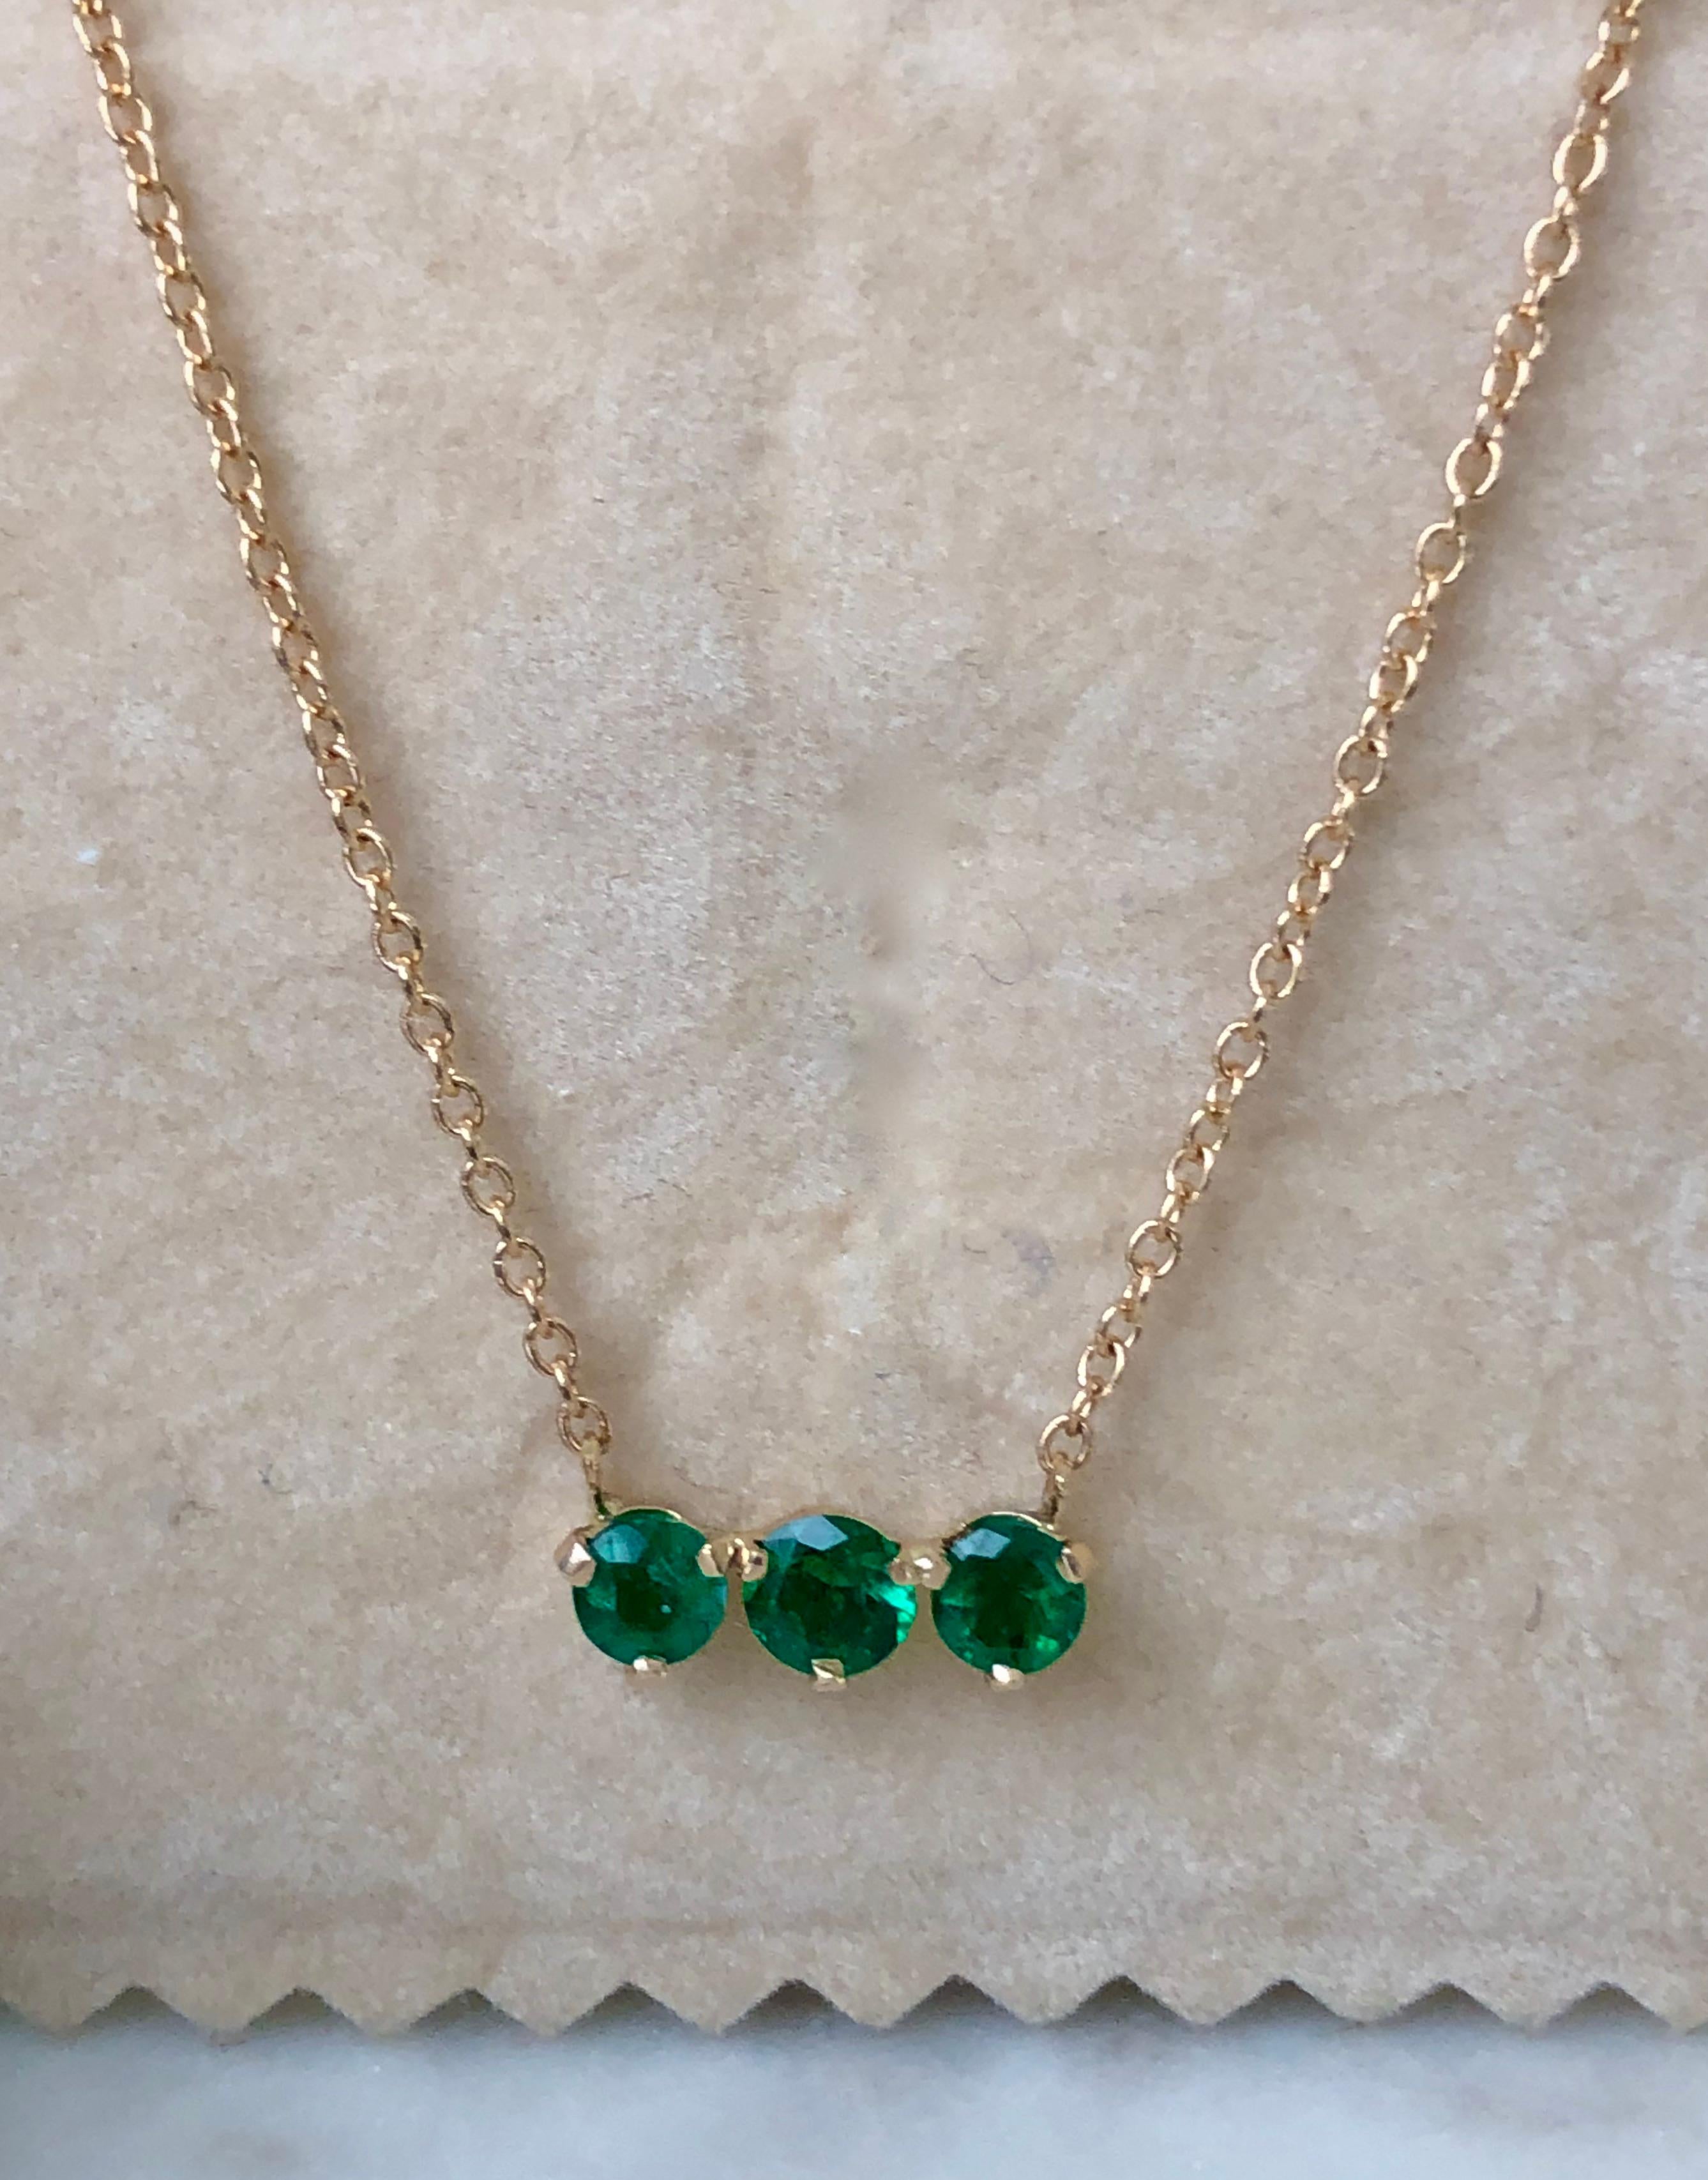 Stunning 3 Colombian AAA emerald, VS- Clarity. Set in Gorgeous Three Stone Pendant Chain Fashion Necklace. Total Colombian Emerald Weight 1.00 Carat. 14K yellow gold 3.2g.
Length 18